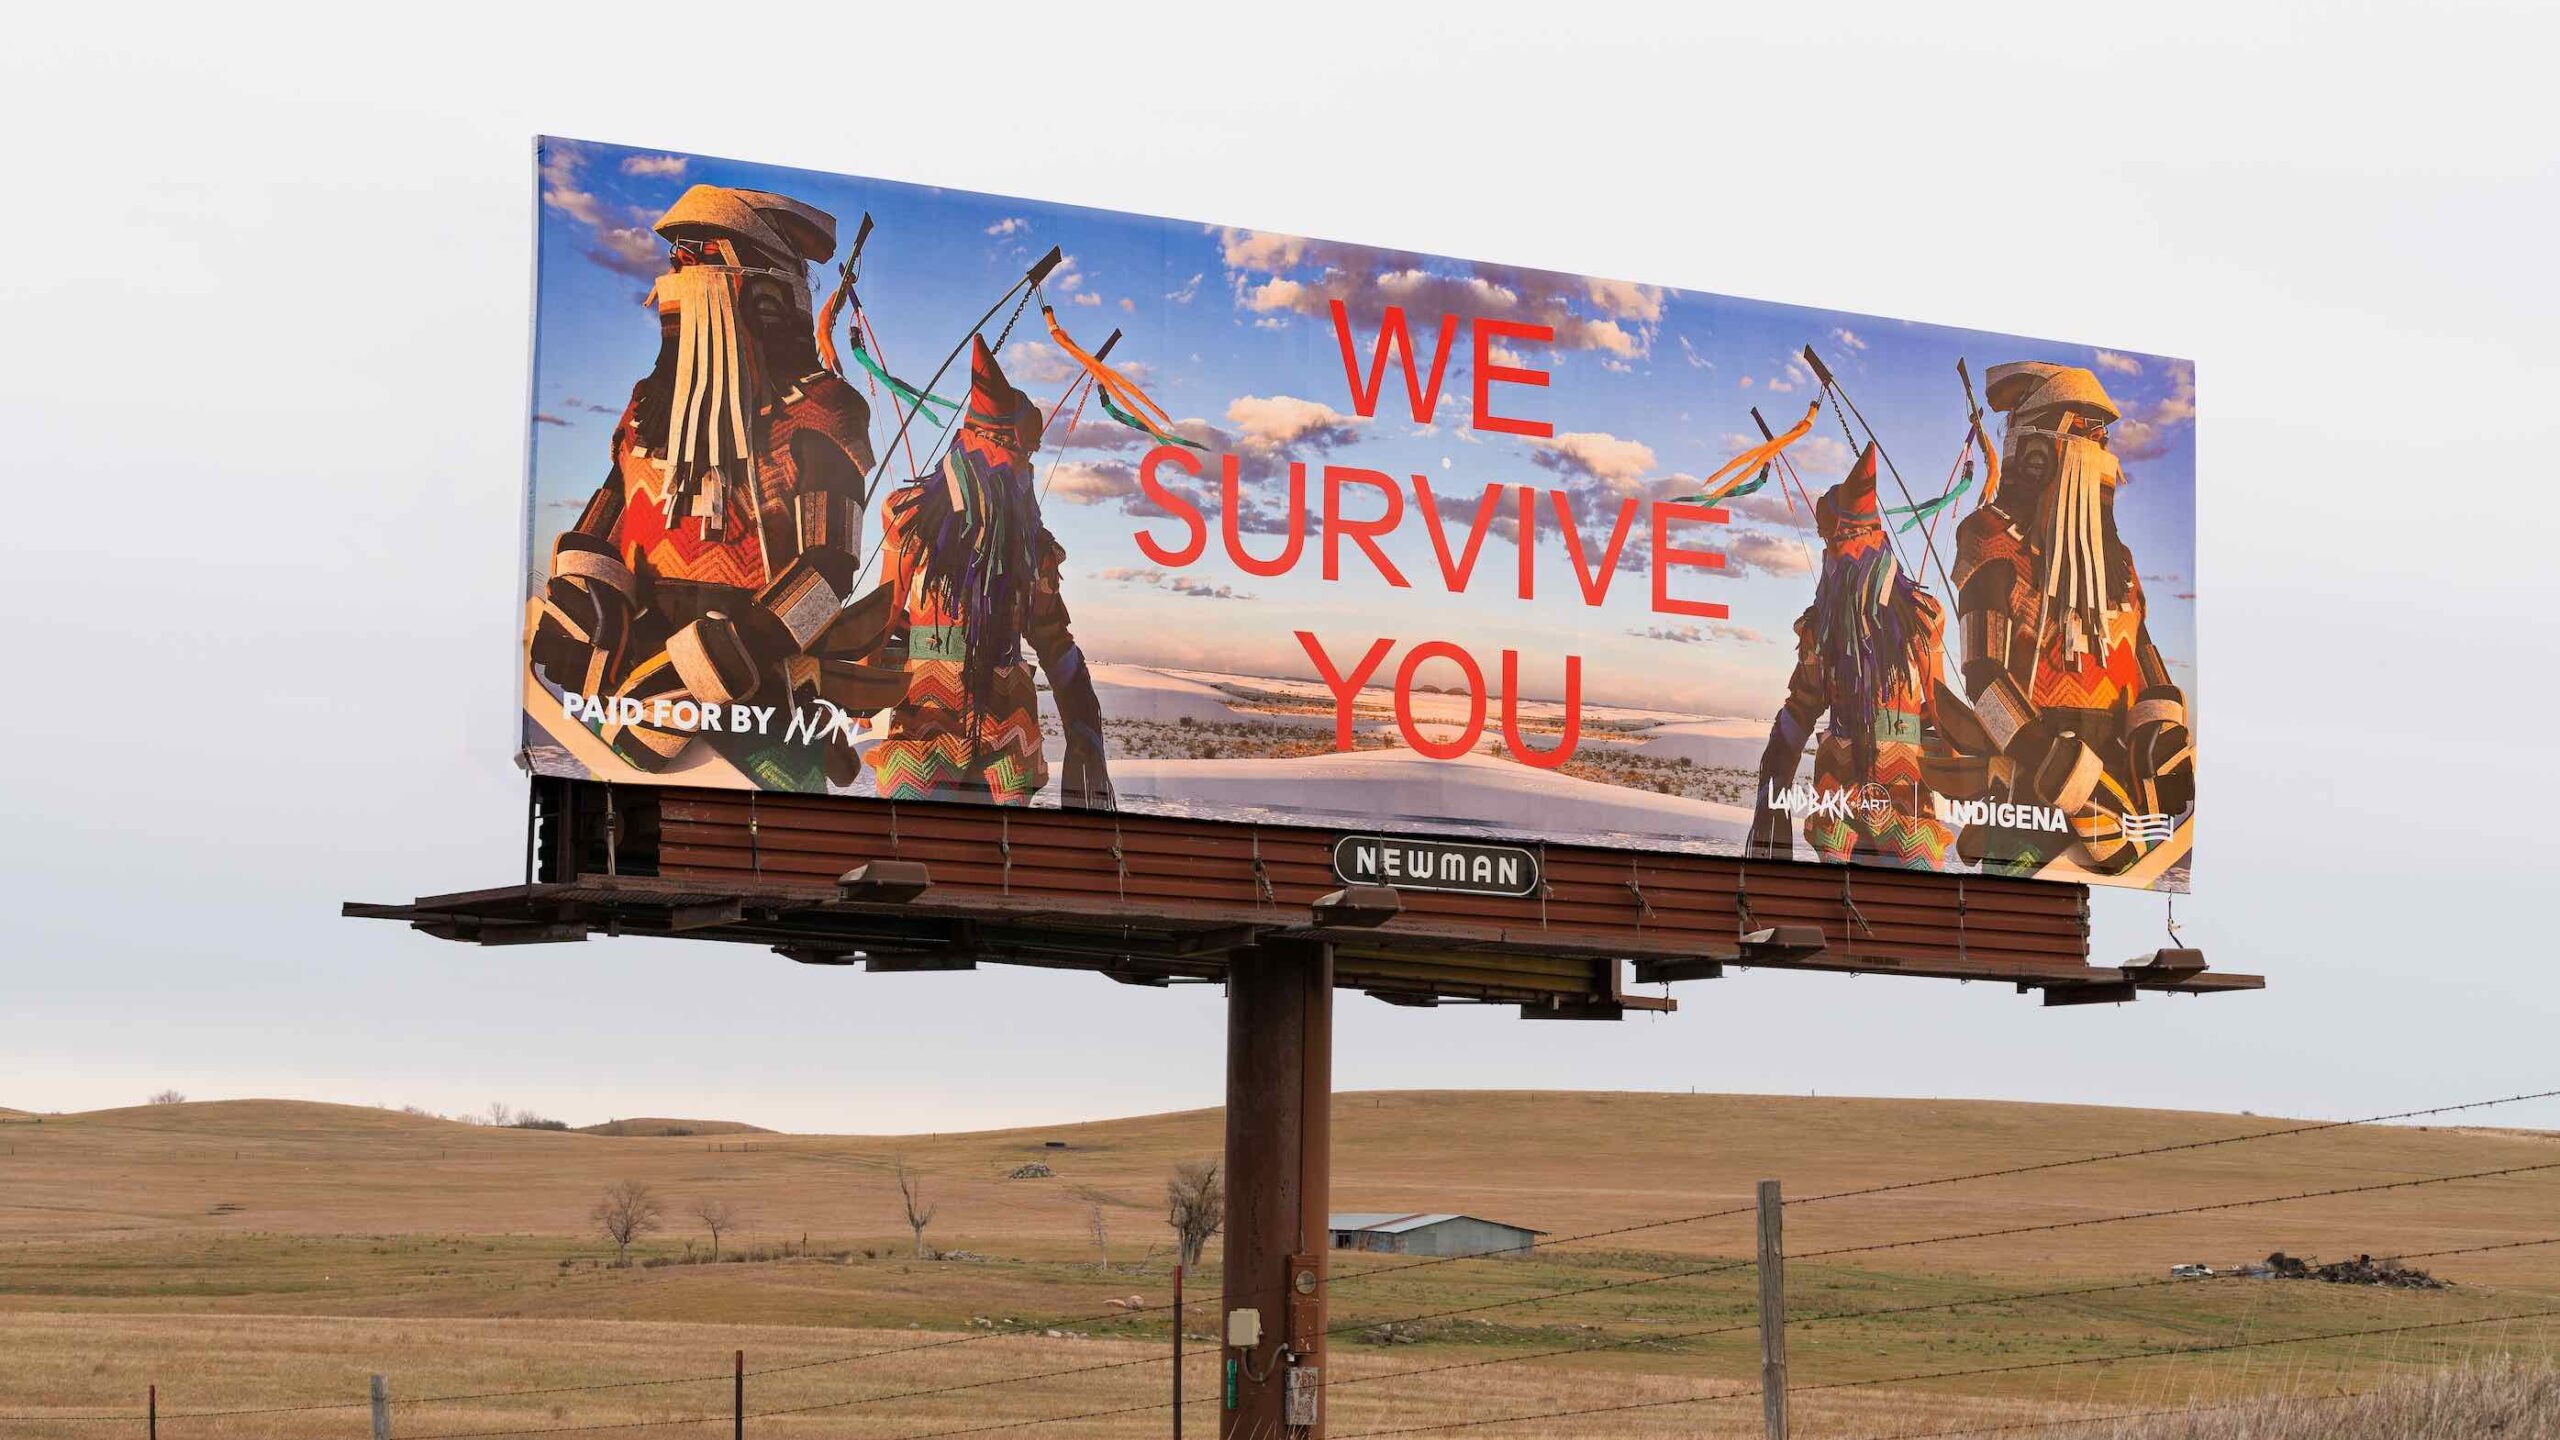 Billboard over field depicting Indigenous Peoples and red text reading "We Survive You"